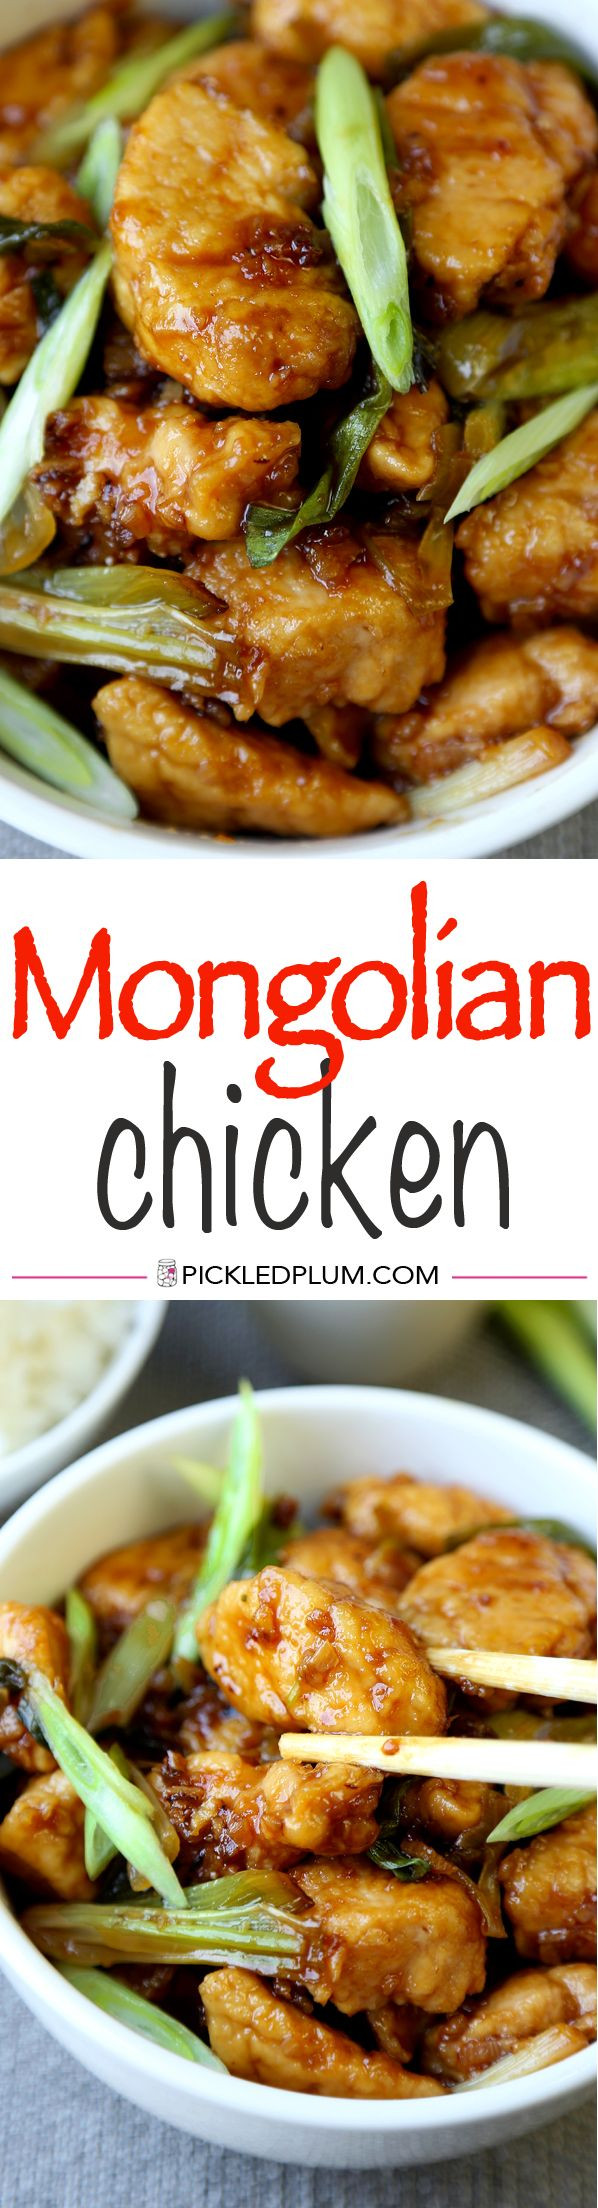 Easy Healthy Asian Recipes
 Best 25 Chinese chicken recipes ideas on Pinterest